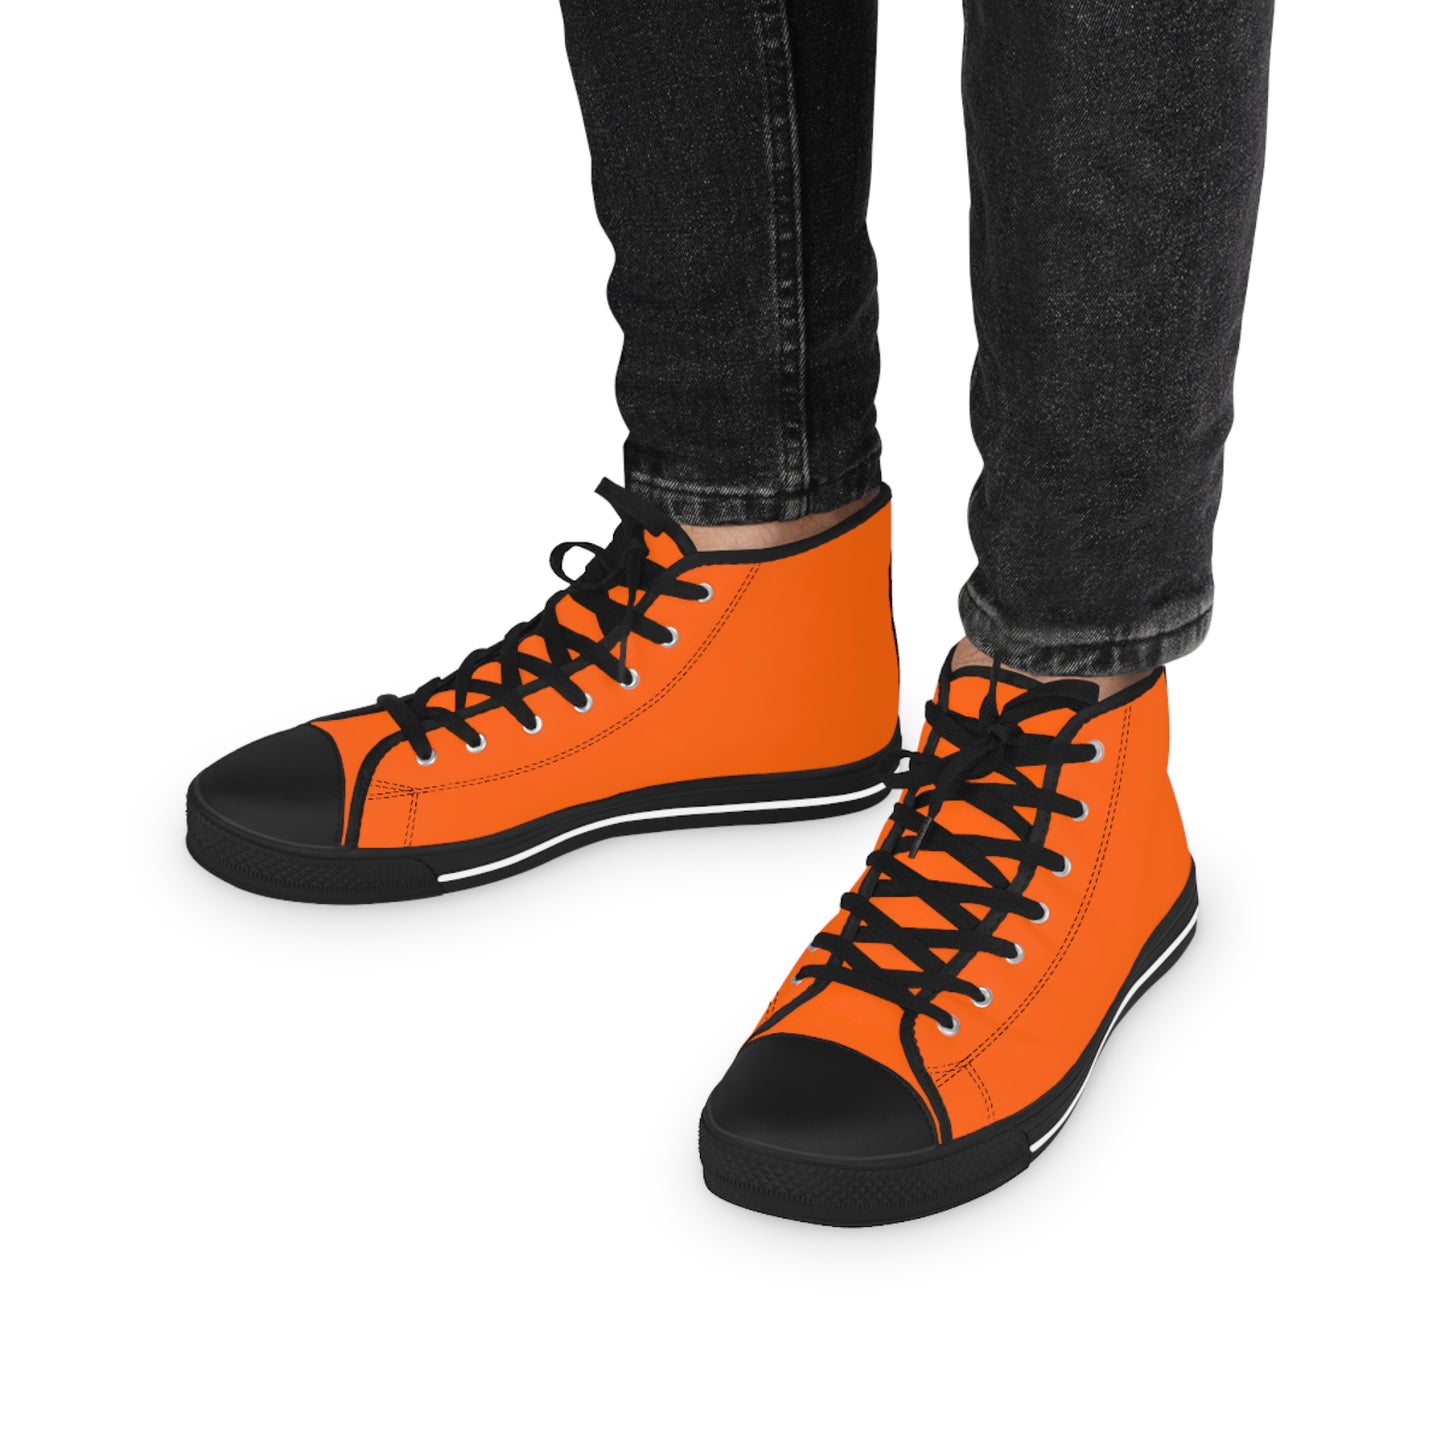 Men's Canvas High Top Solid Color Sneakers - Electric Orange US 14 White sole